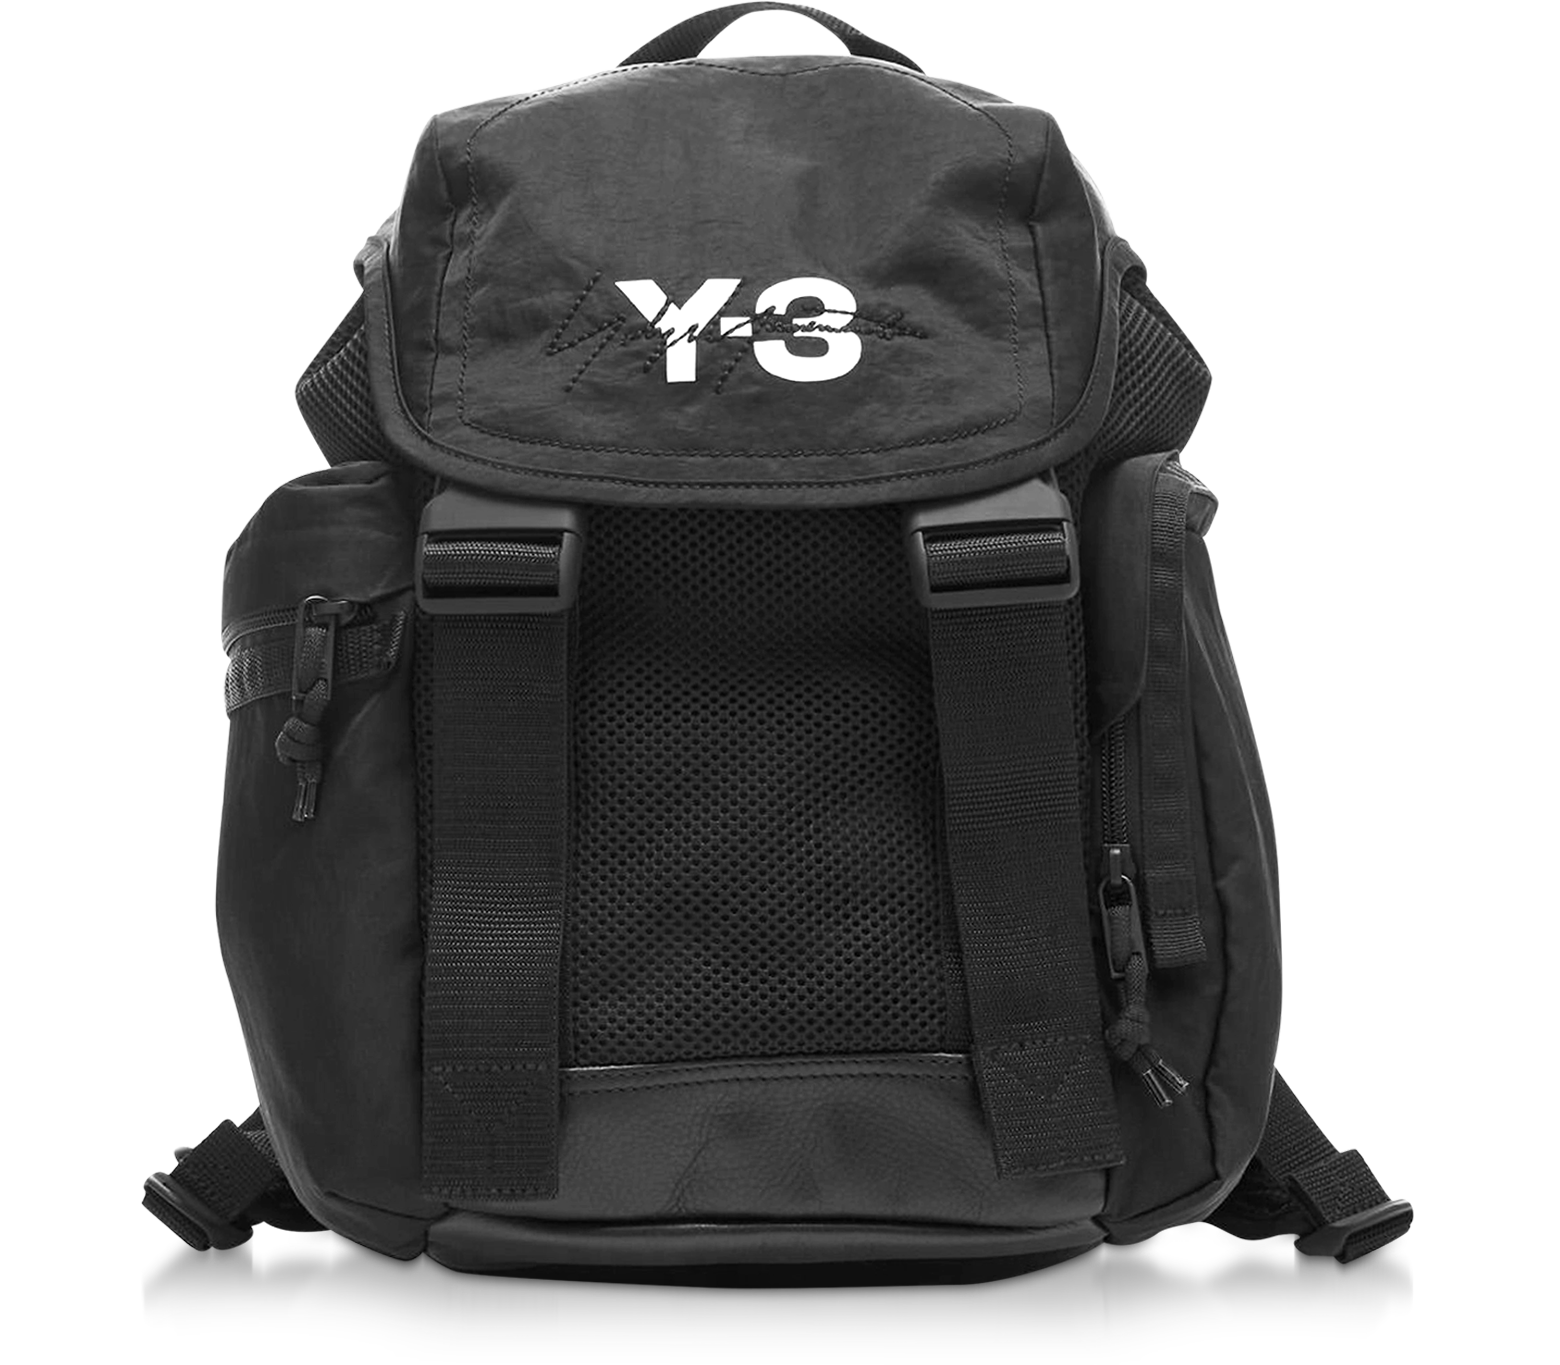 Y-3 XS Mobility Backpack